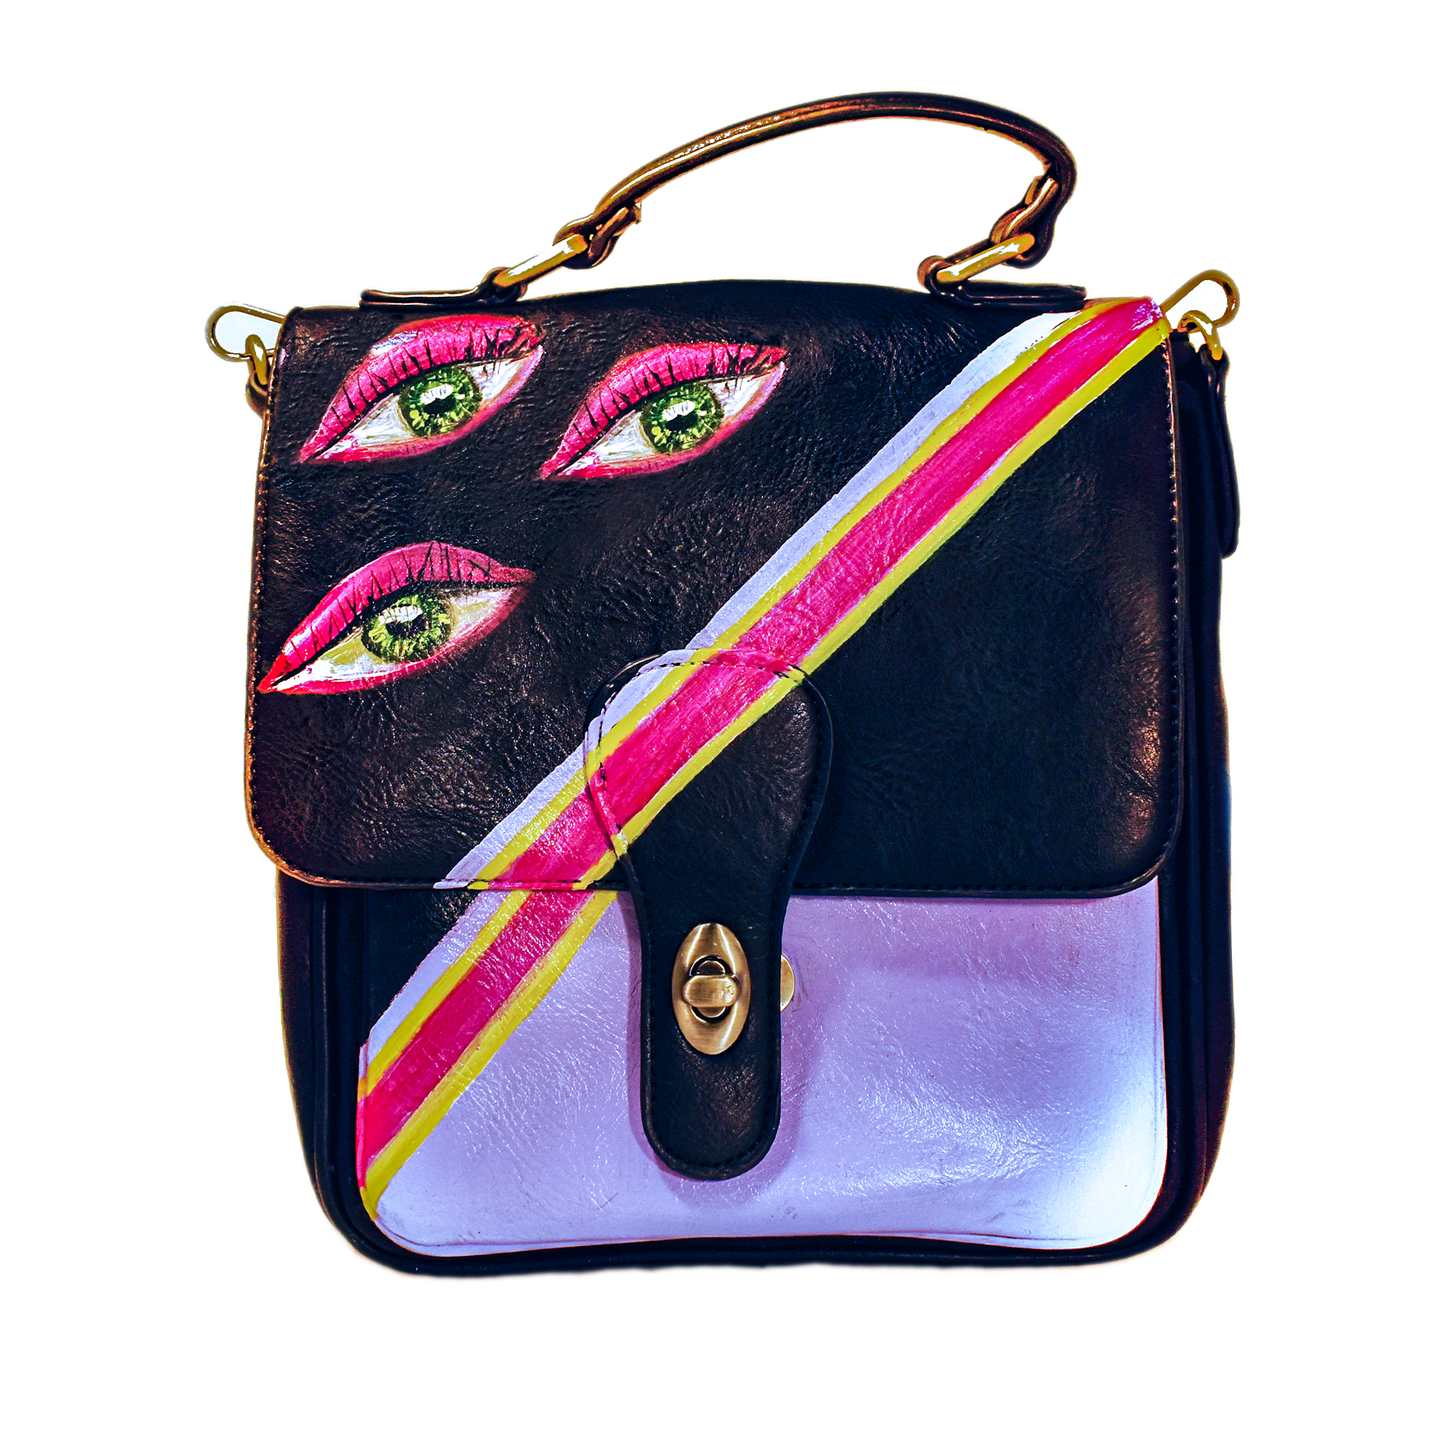 Eye See You - Antik Kraft Cross-body Shoulder Bag - Hand Painted by Temporarily Not Famous